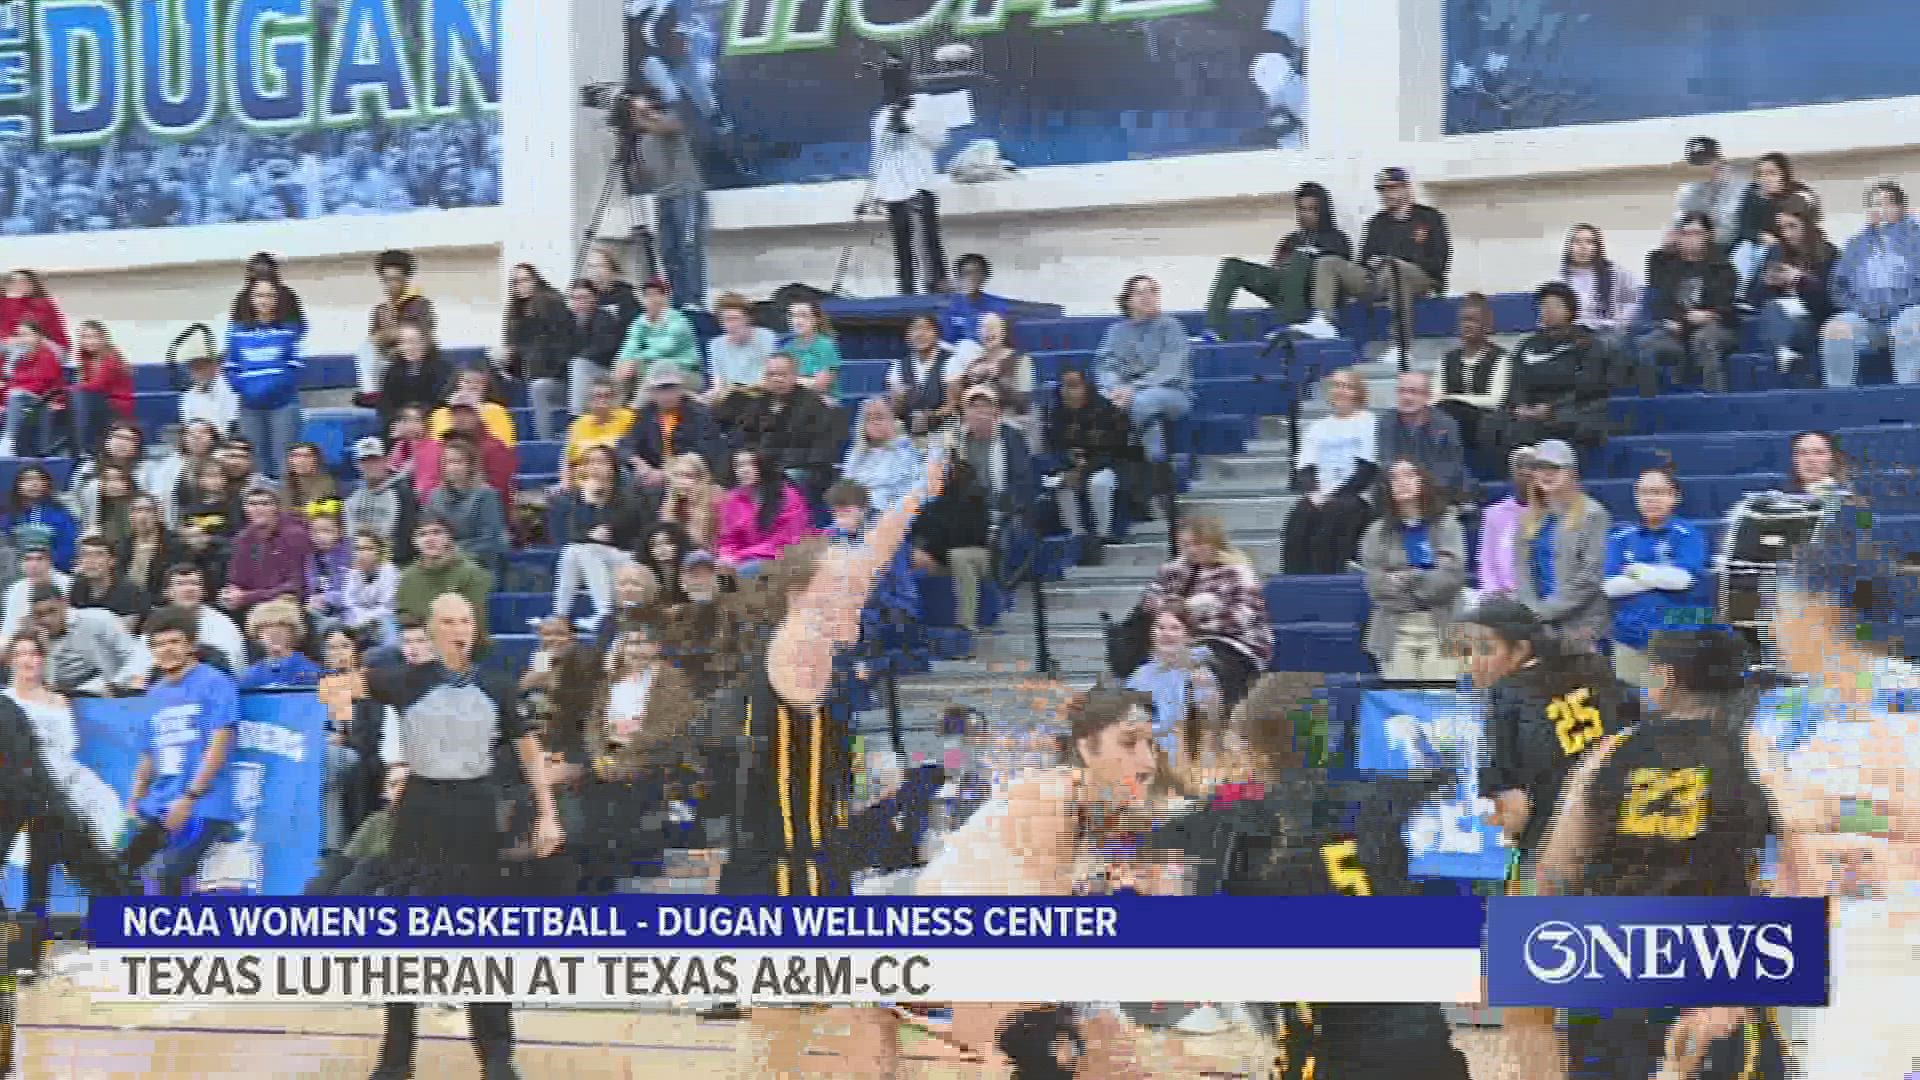 Texas A&M-CC has now won 15 straight inside the Corpus Christi city limits after the 70-38 win over the Bulldogs Wednesday.